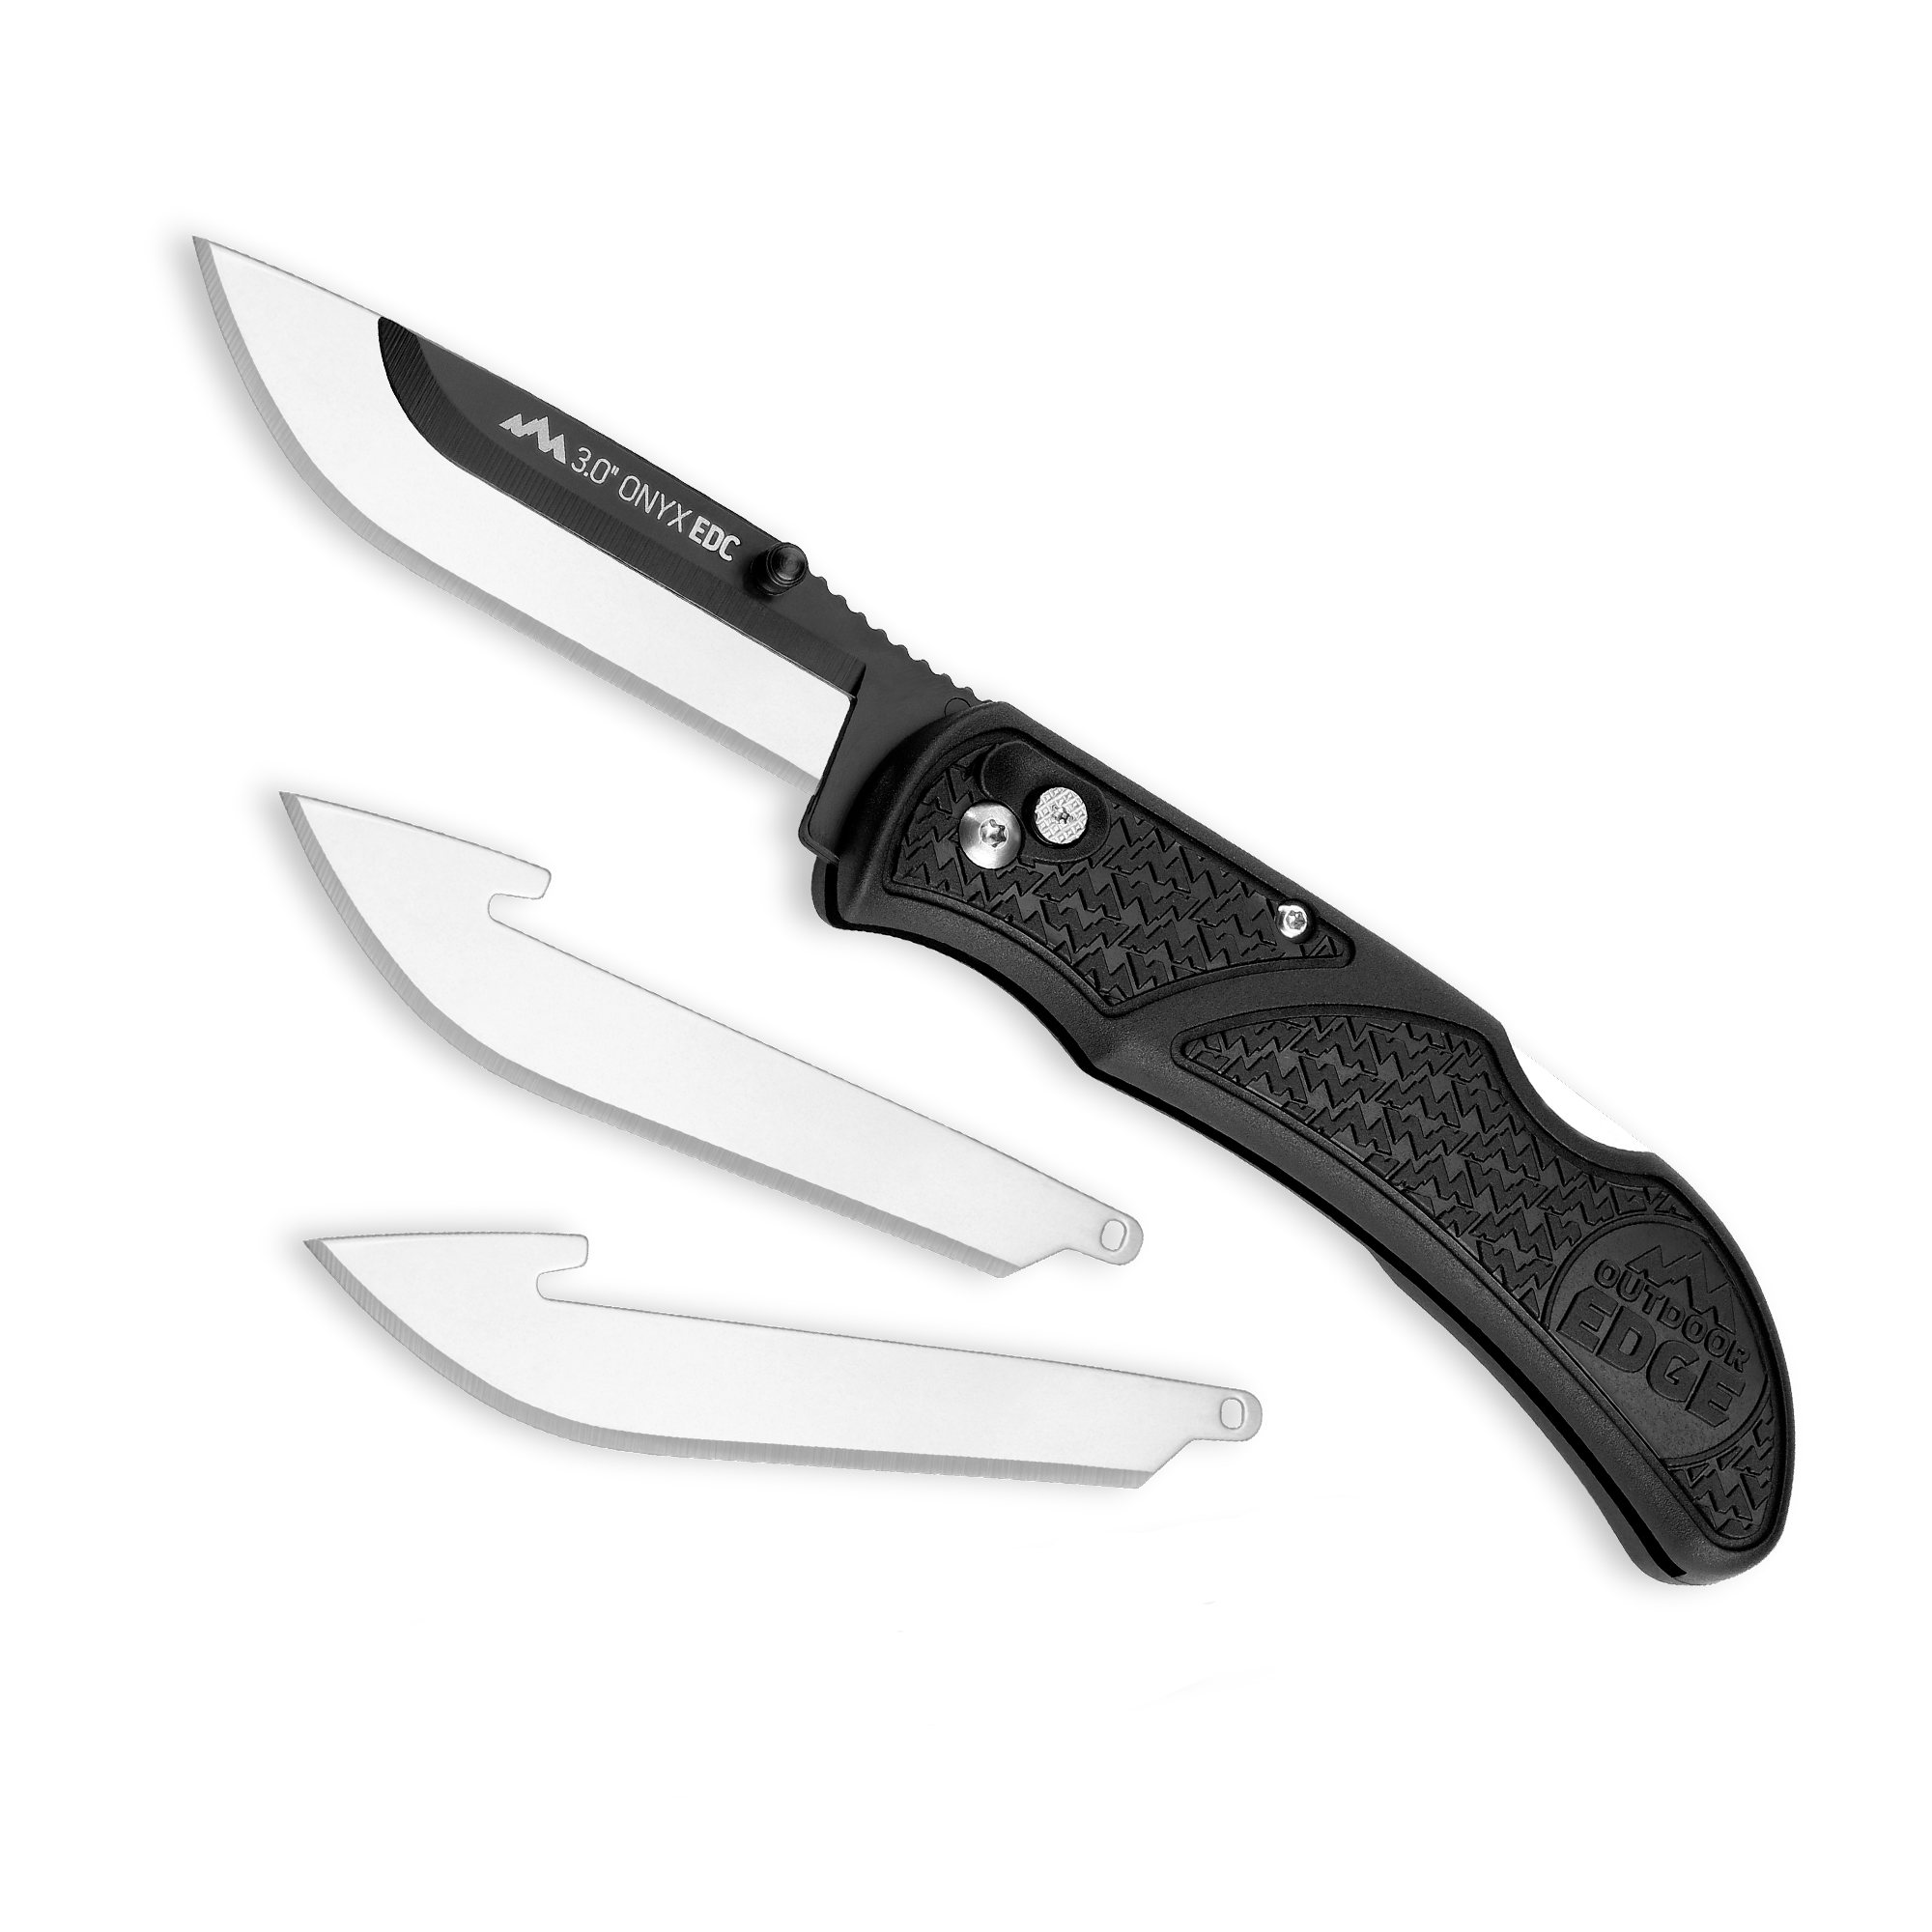 OnyxLite, Compact EDC Knife with Replaceable Blades